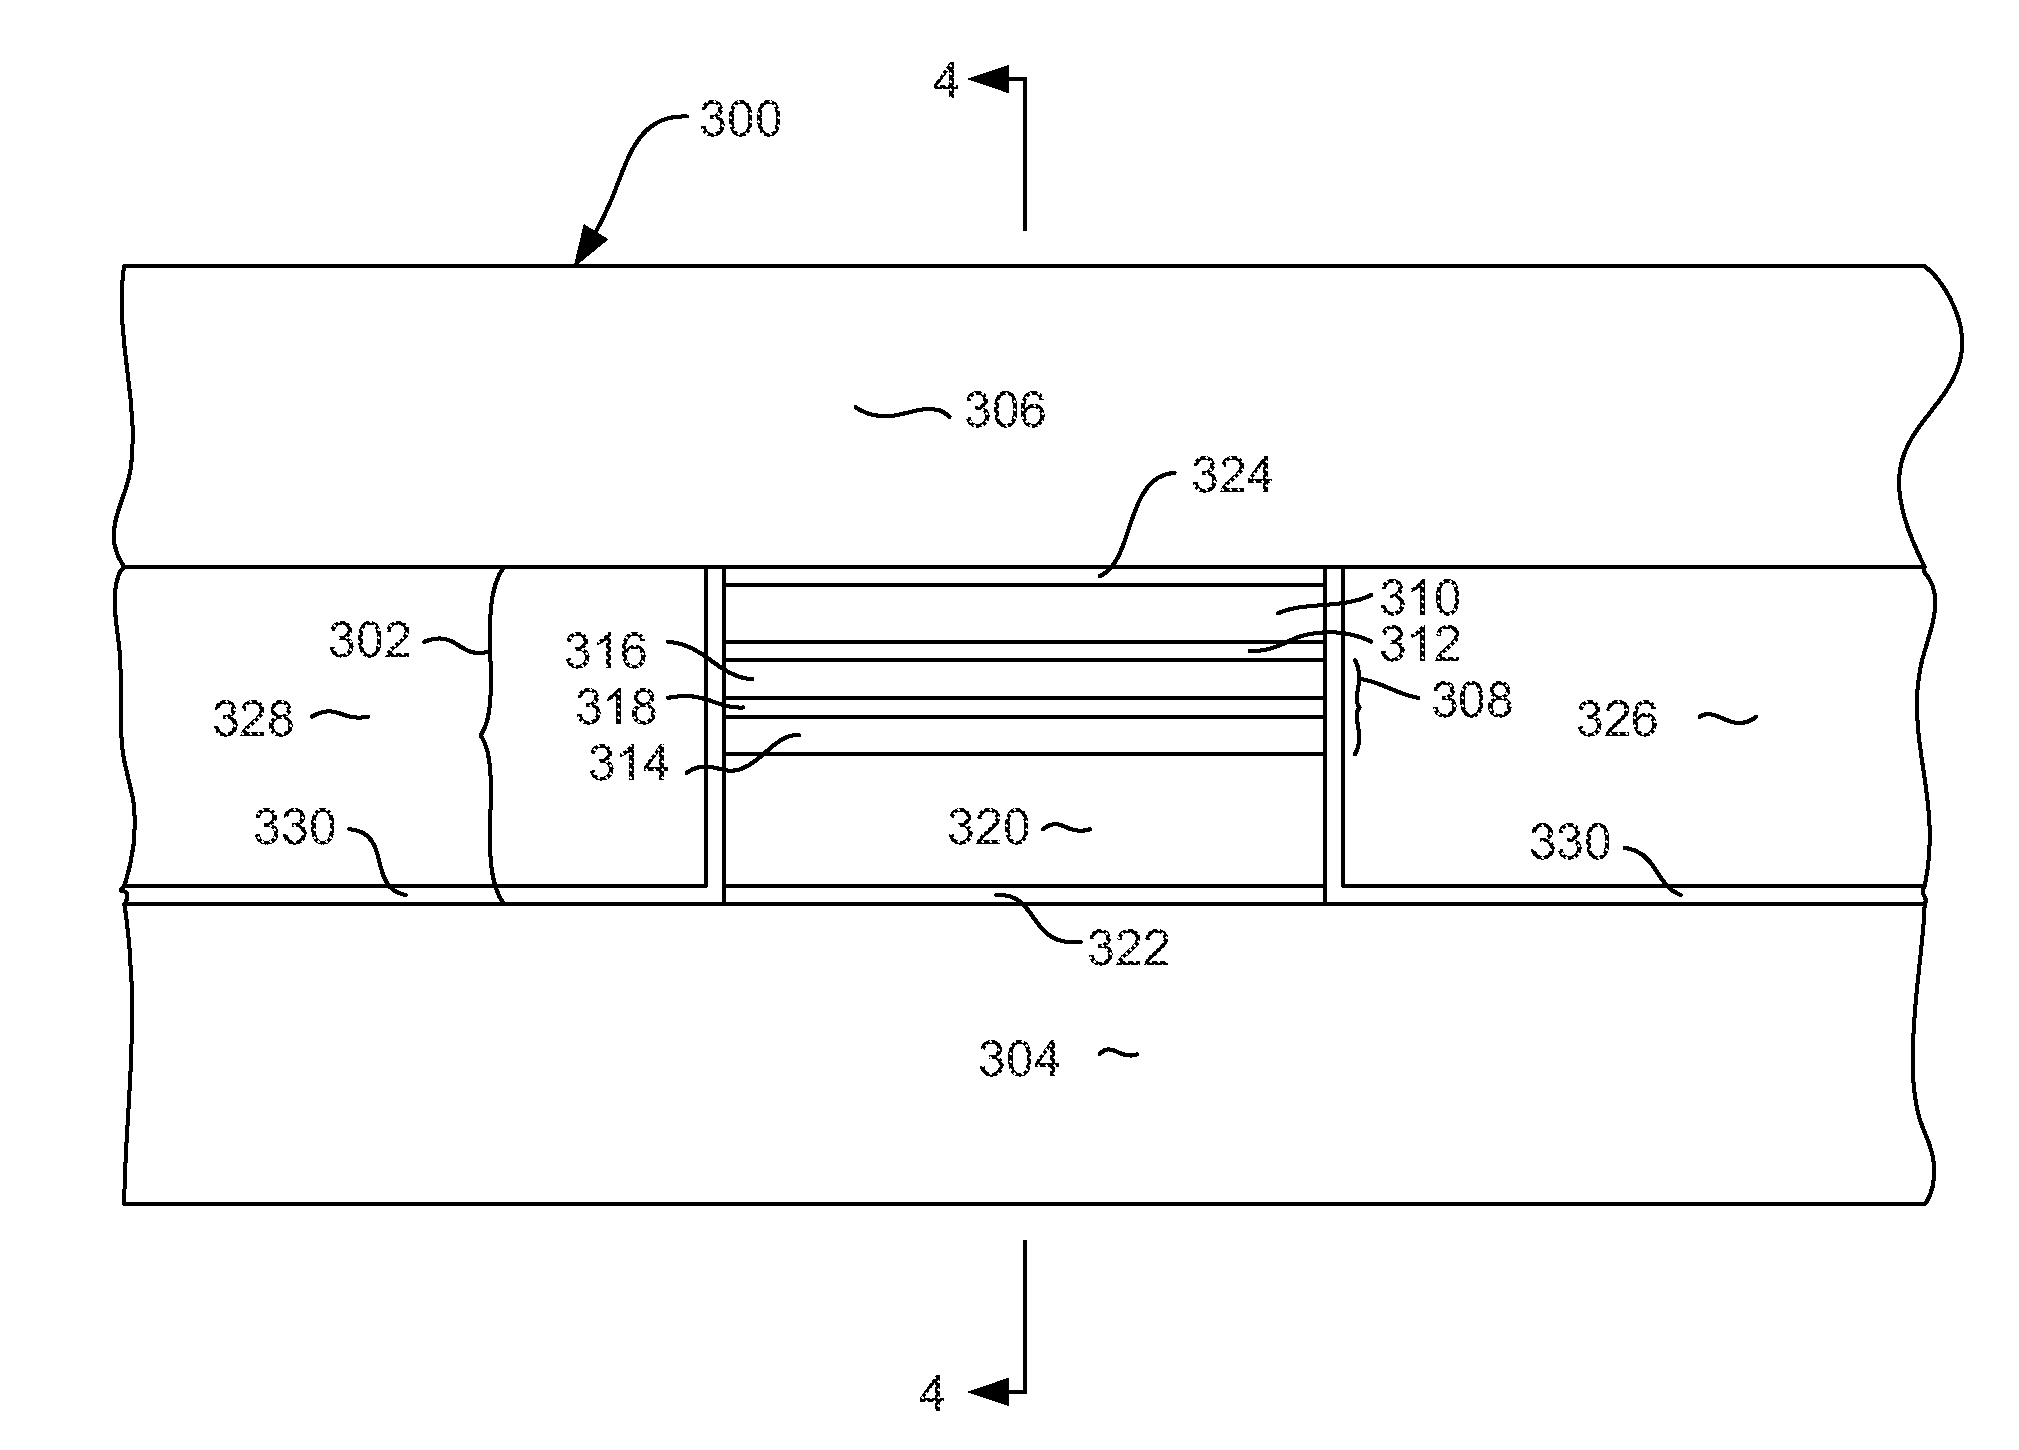 Method for manufacturing a magnetoresistive sensor using simultaneously formed hard bias and electrical lapping guide